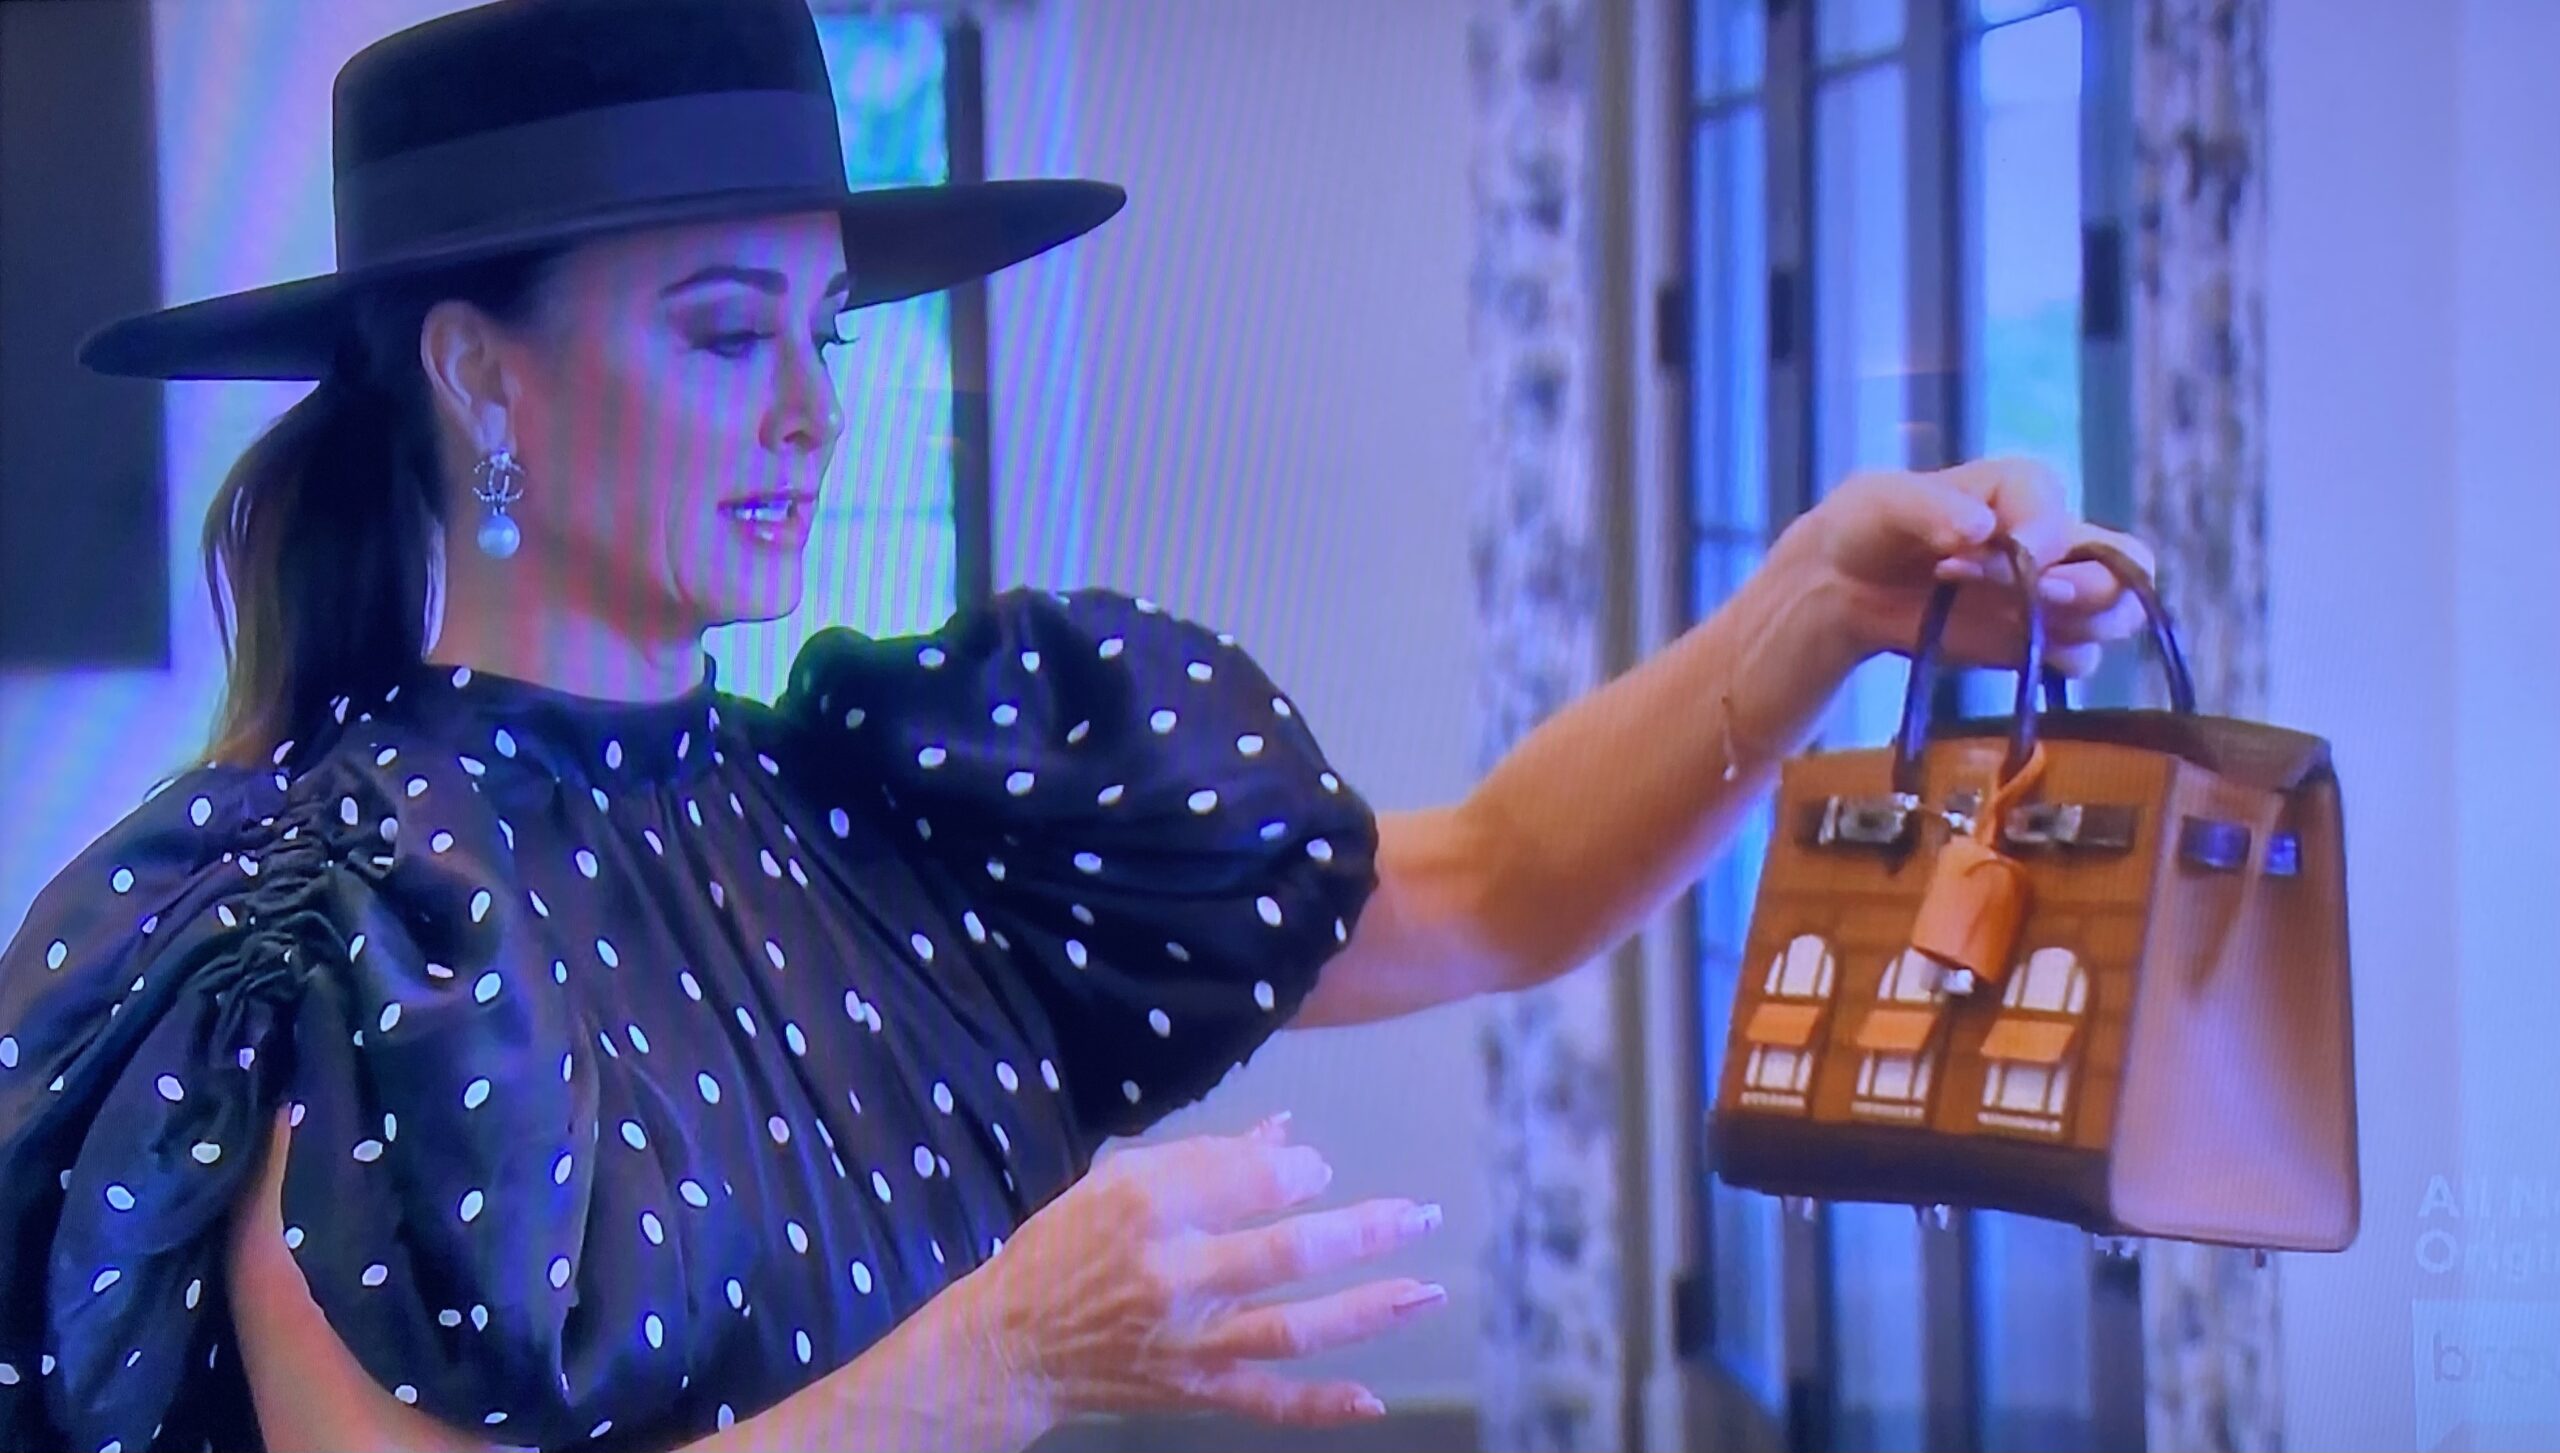 How Many Hermès Bags Did You See on The Real Housewives of Beverly